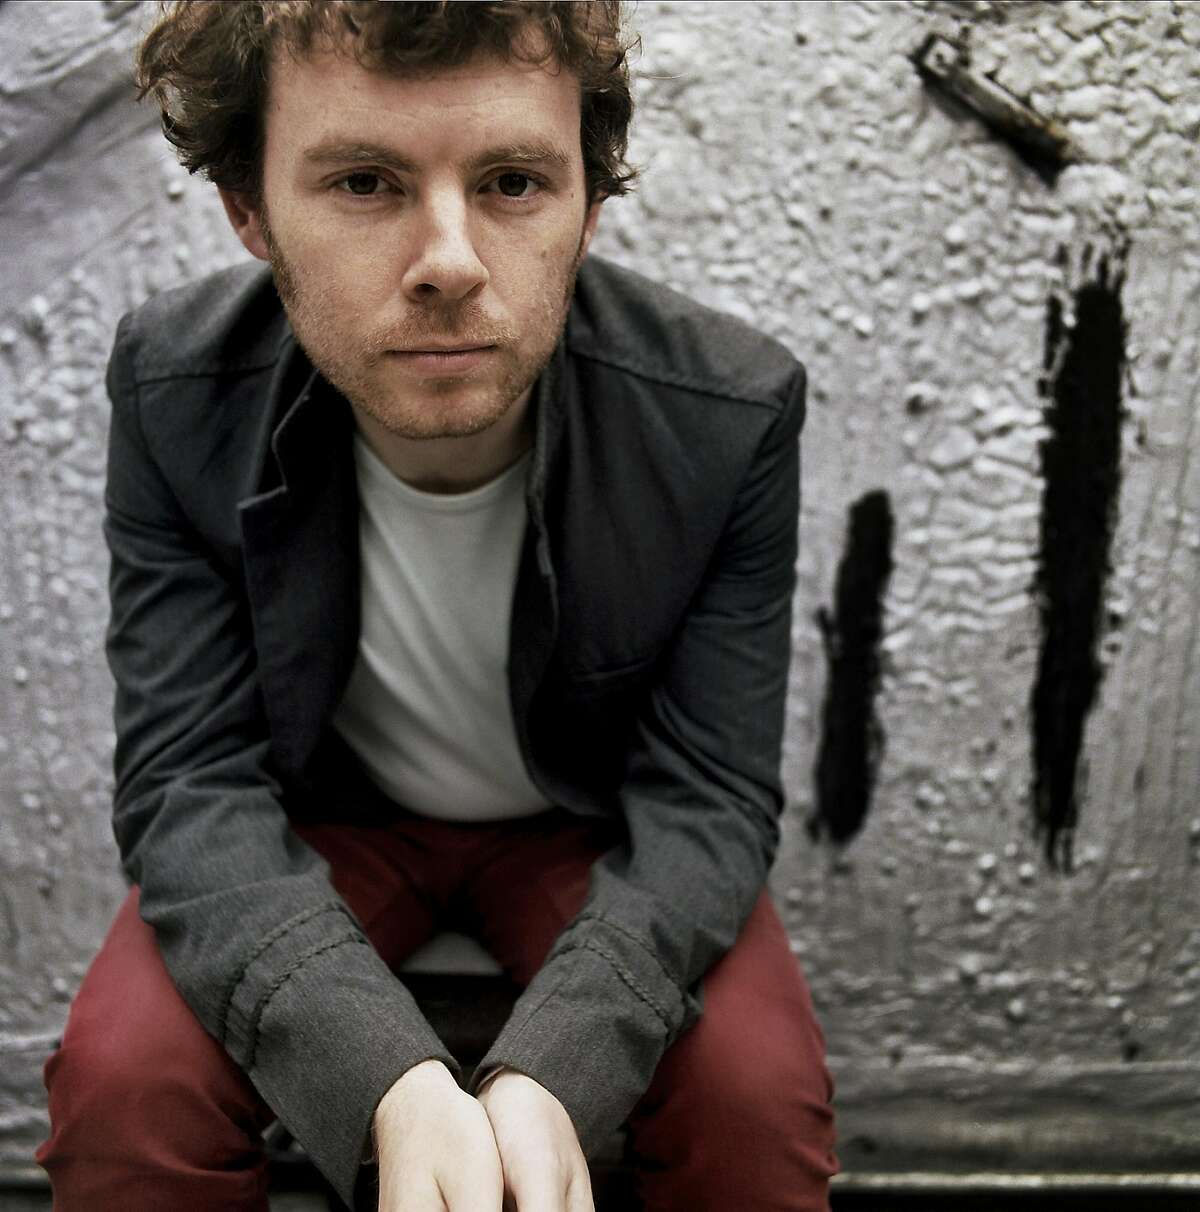 Versatile musician Gabriel Kahane teams with the Greater Bridgeport Symphony and Maestro Eric Jacobsen at the kick-off of the spring season on Saturday, March 14, at the Klein Memorial Auditorium.